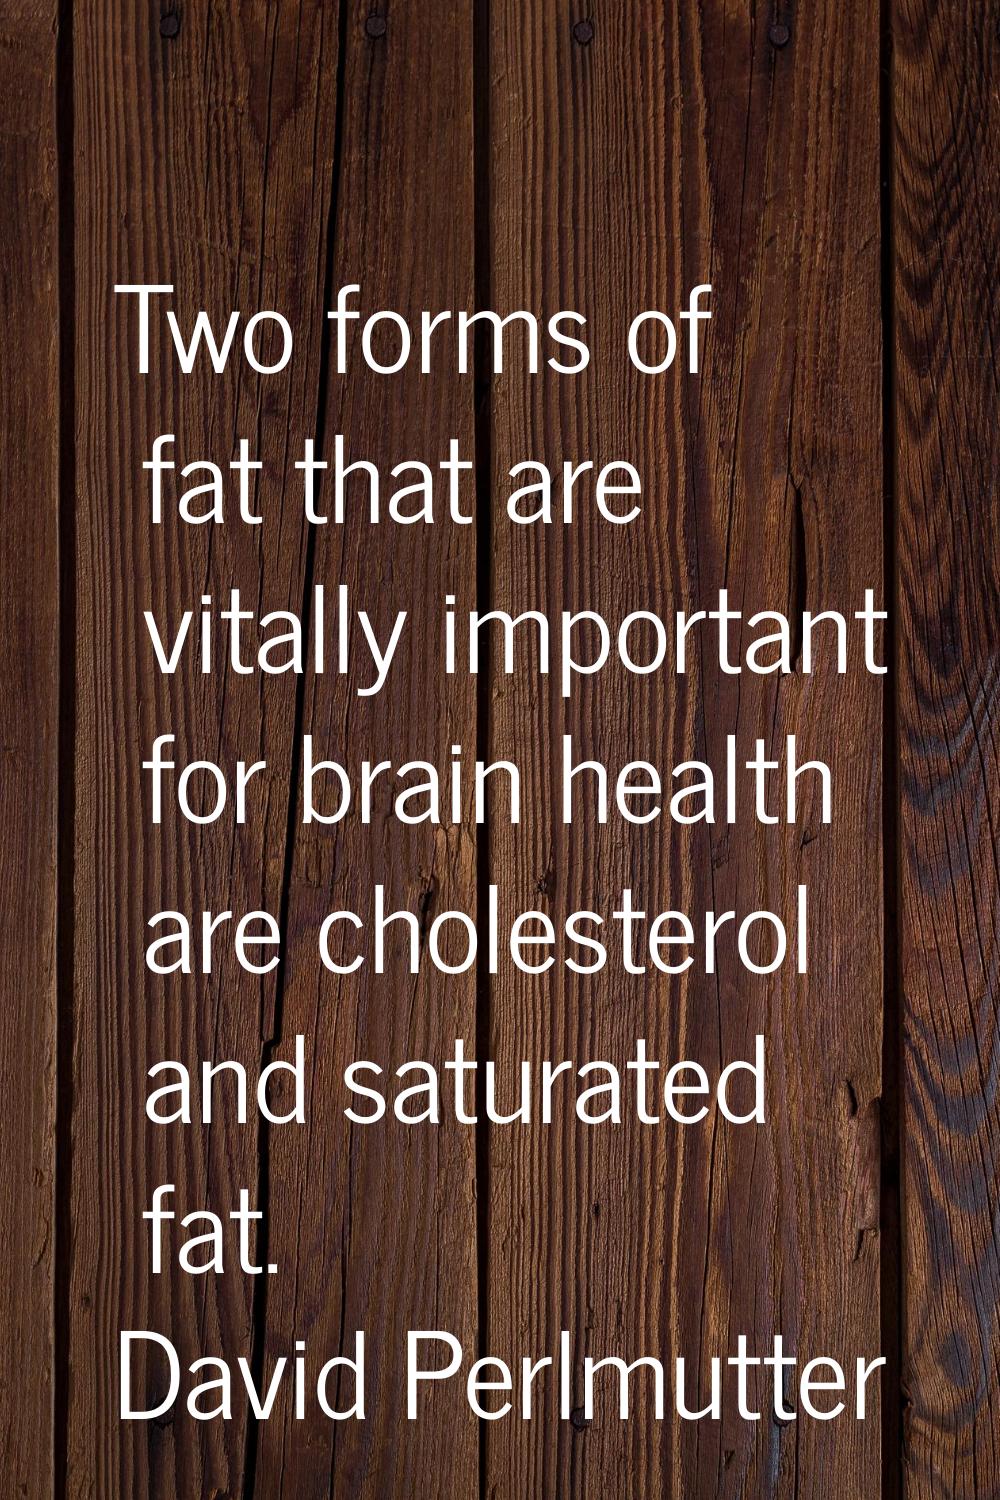 Two forms of fat that are vitally important for brain health are cholesterol and saturated fat.